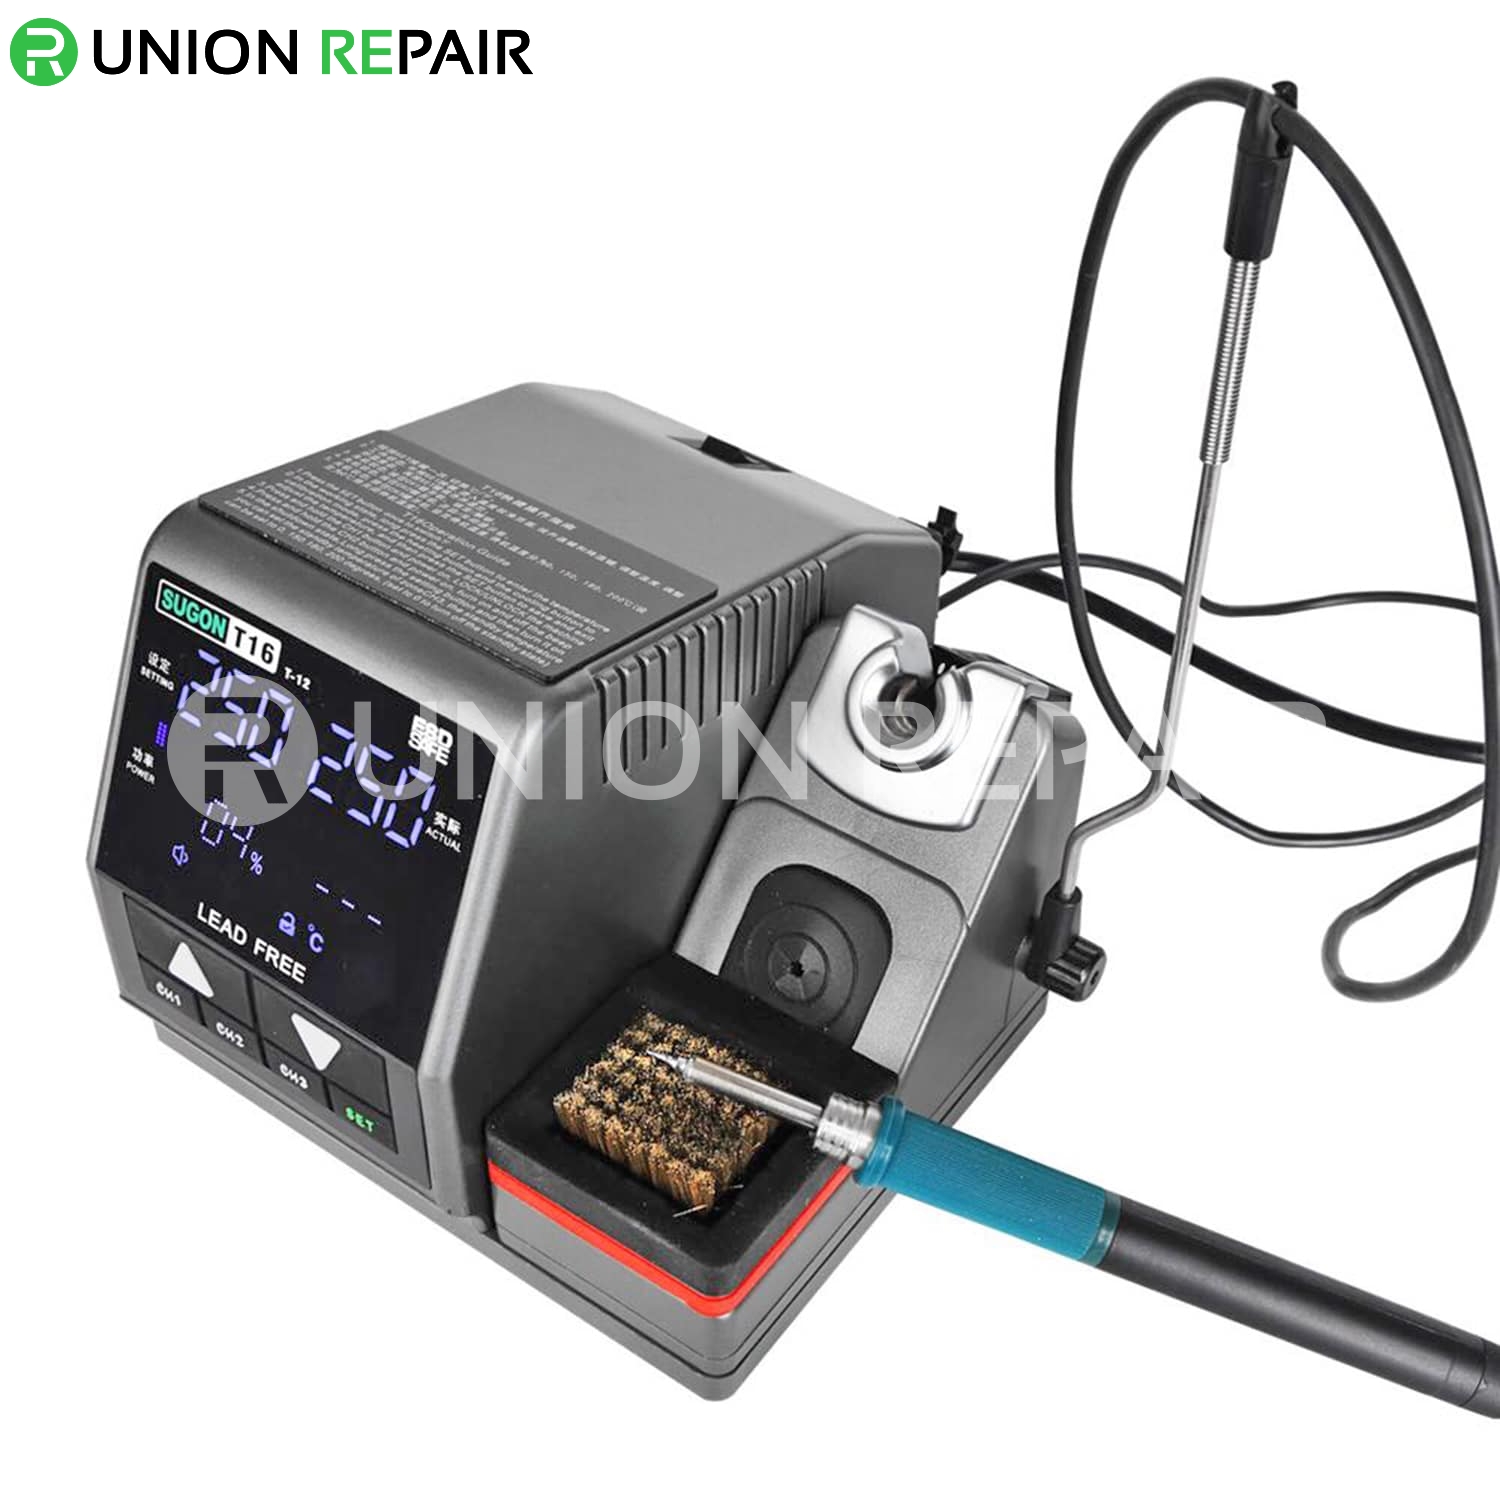 SUGON T16 Precision Soldering Station Suitable for T12 Soldering Tip